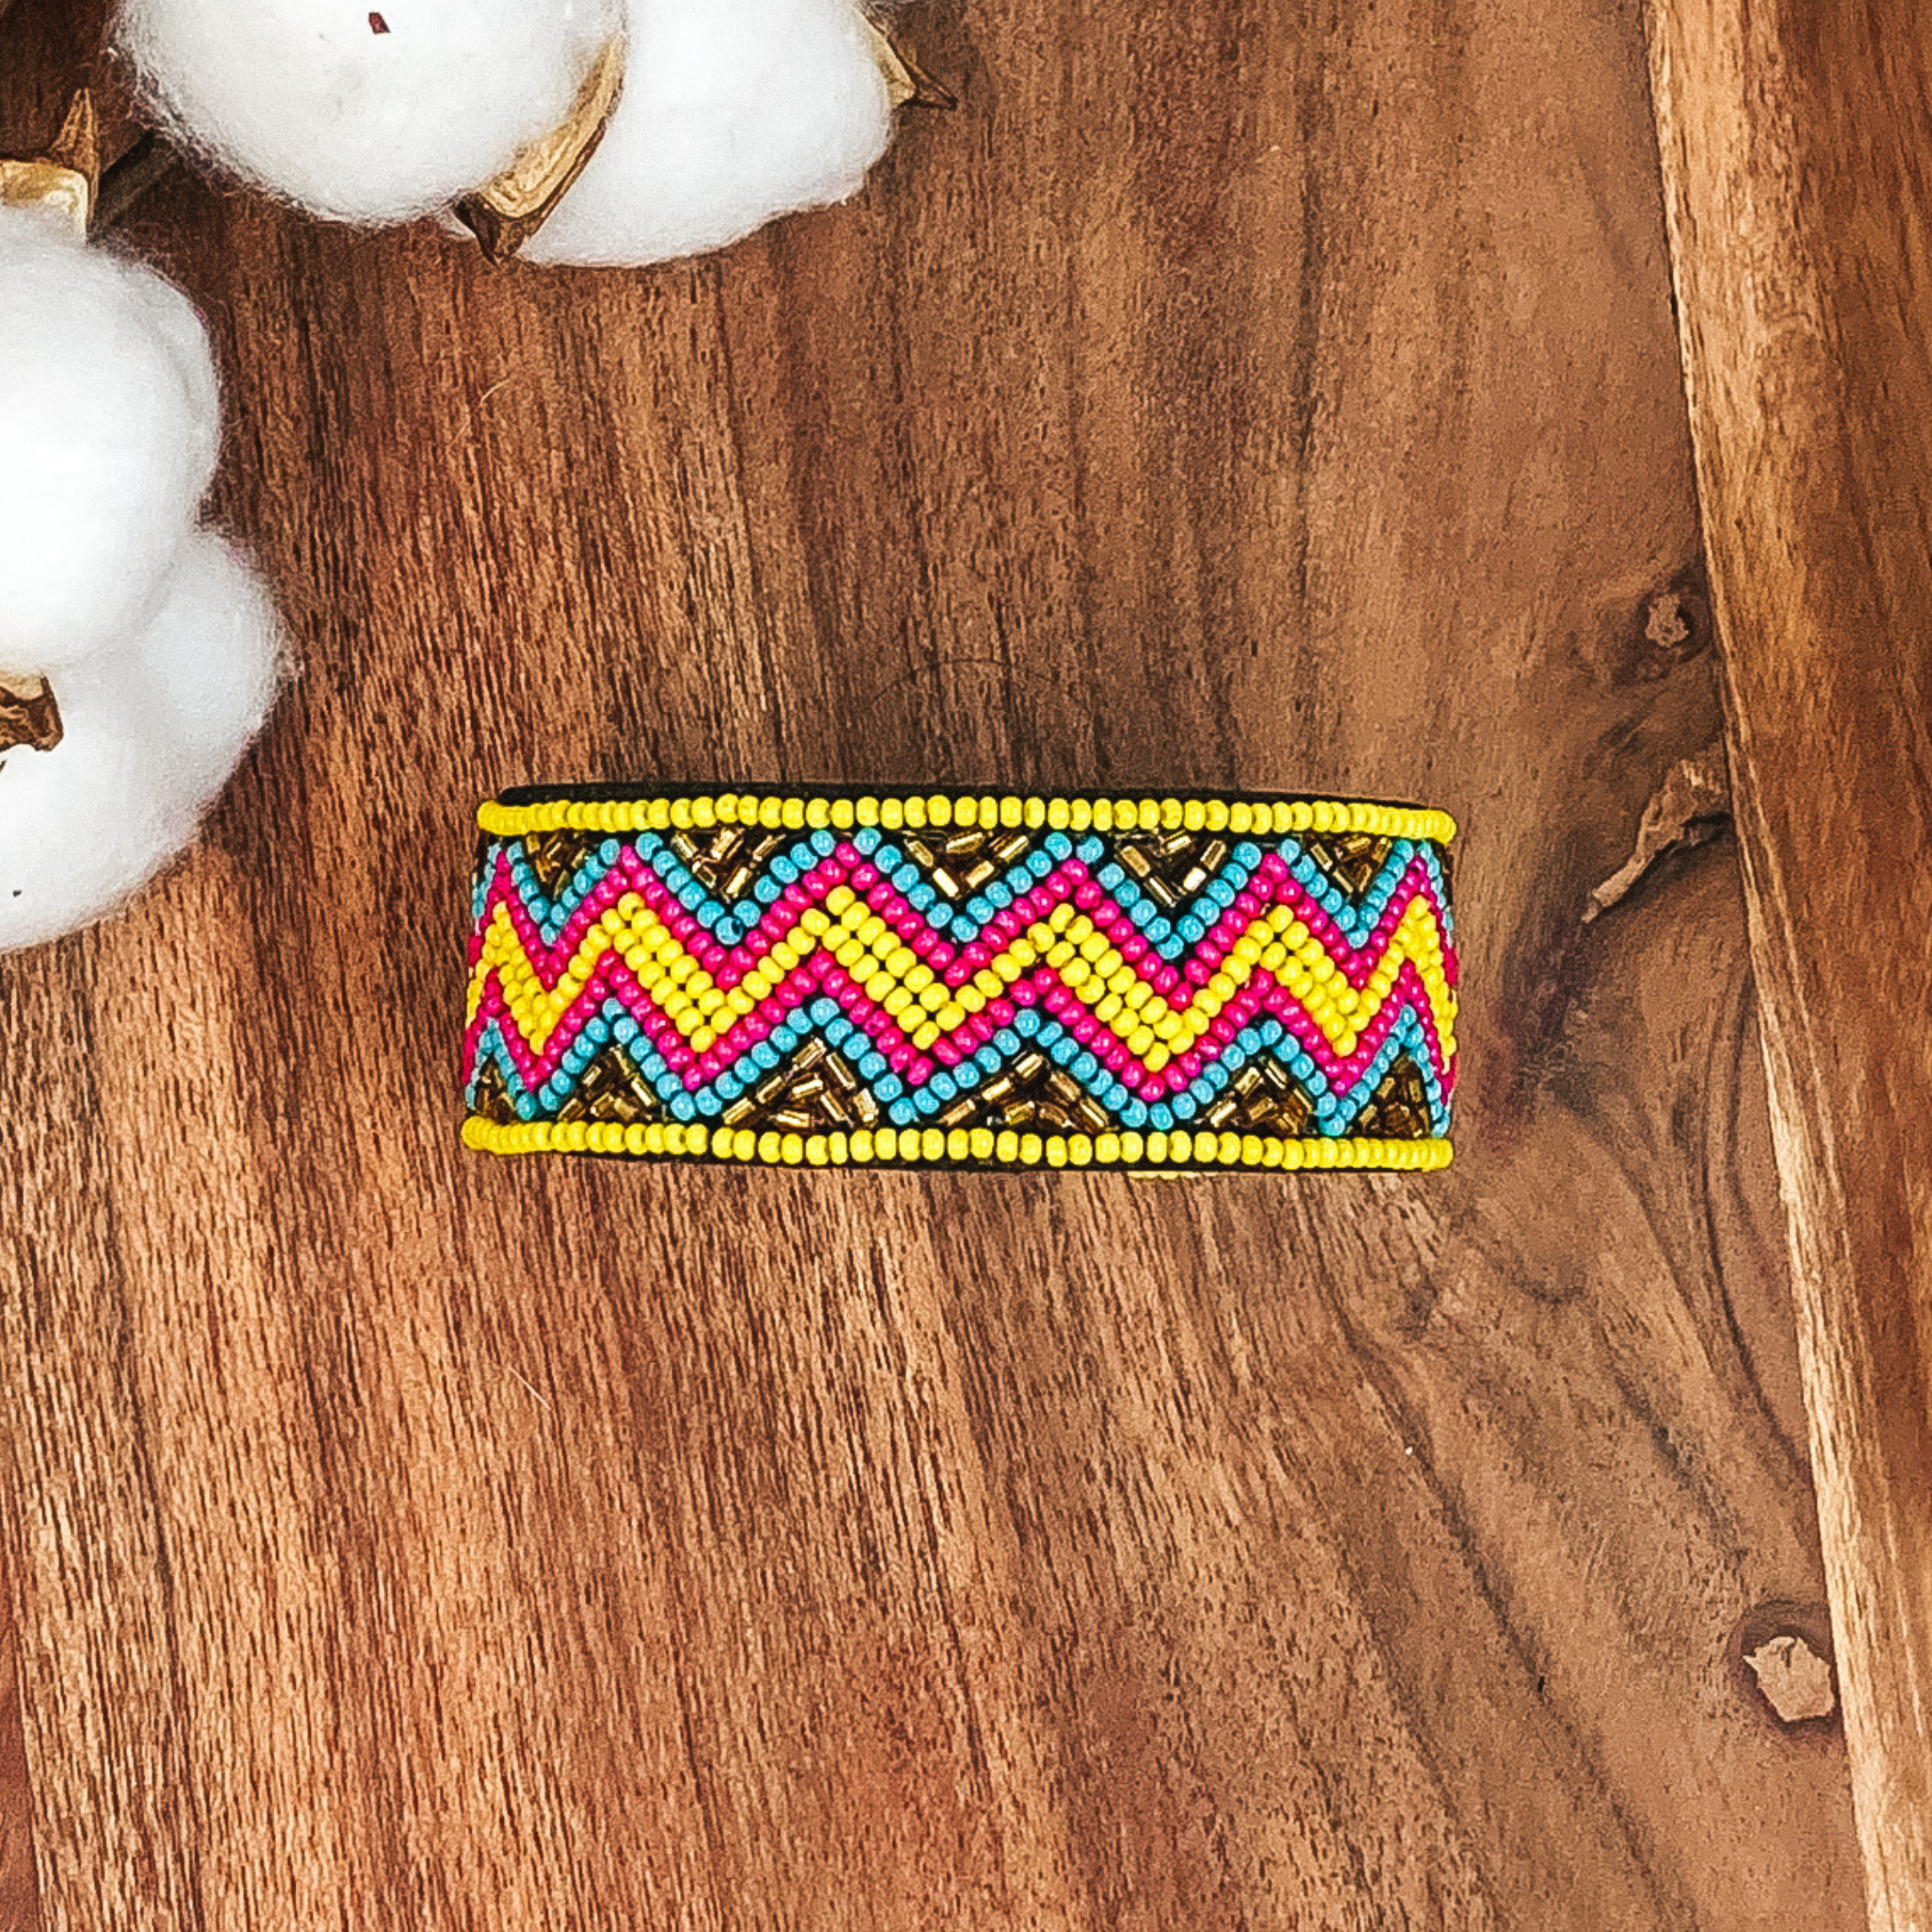 Neon Chevron Bracelet in Multicolored - Giddy Up Glamour Boutique